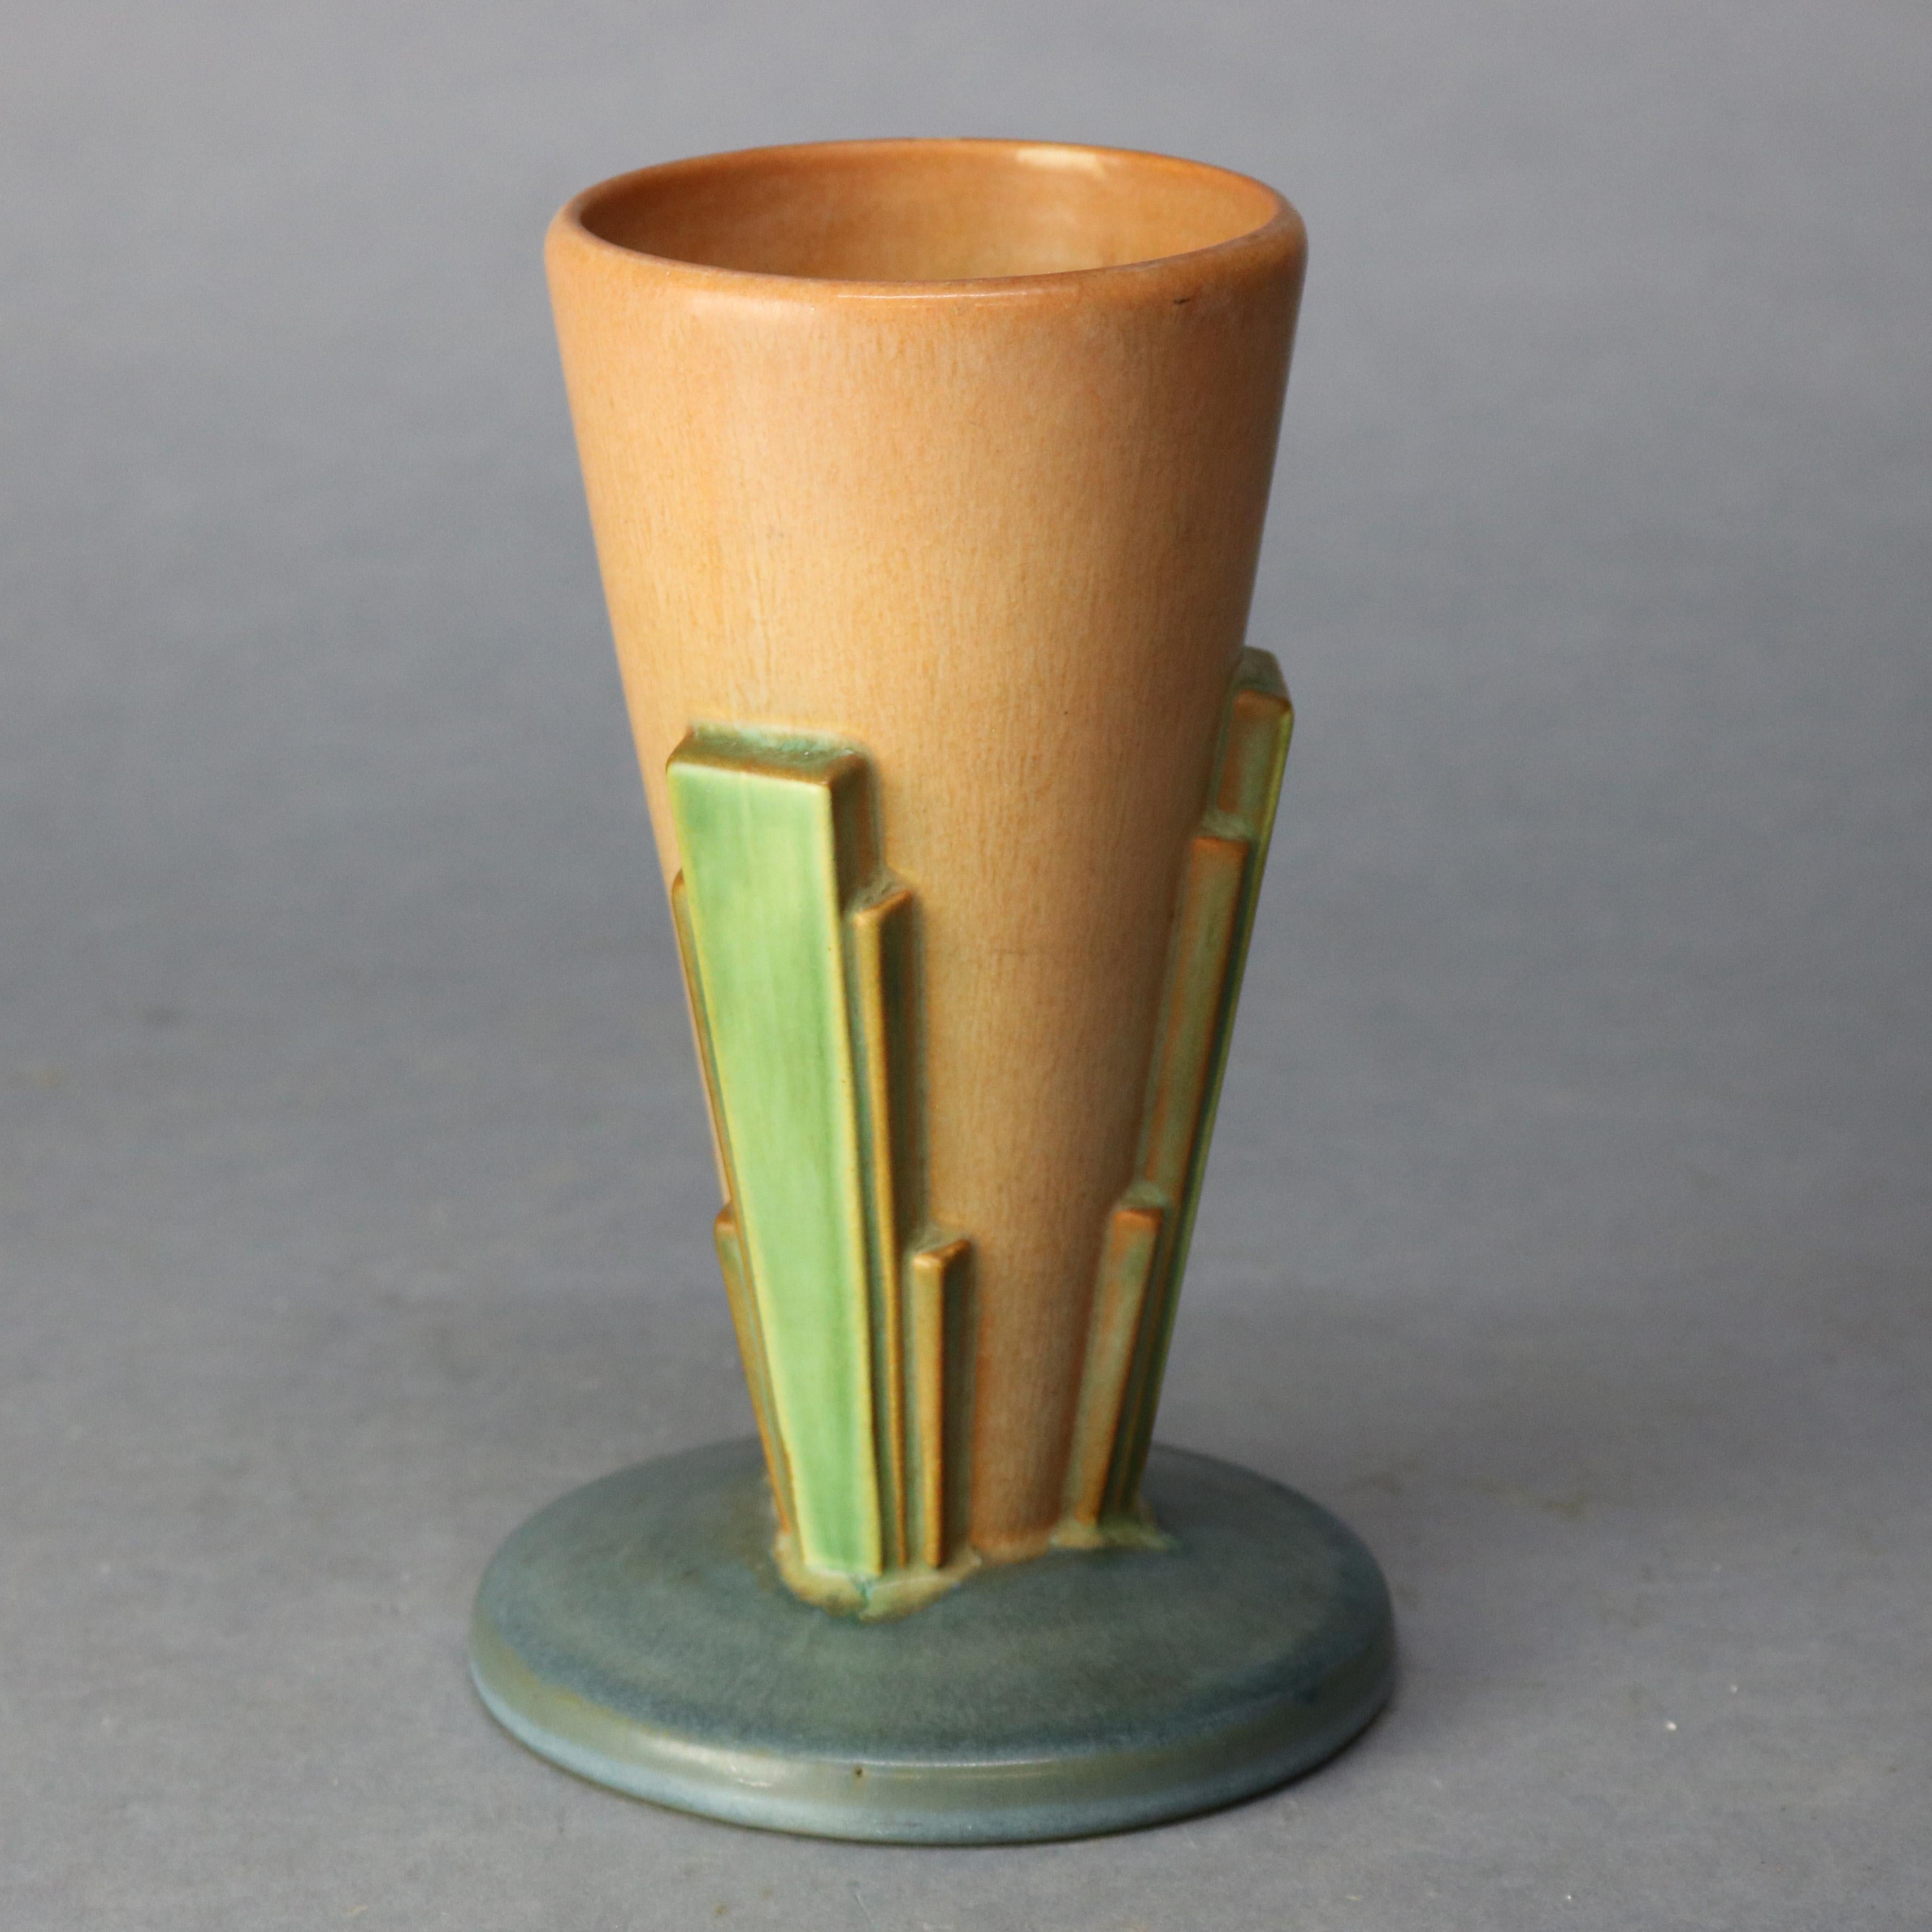 A vintage art pottery vase by Roseville of the Futura line offers stylized southwestern design with flared terracotta glazed vessel having four green buttresses in the manner of stylized dessert foliate elements, seated on round foot, unmarked,